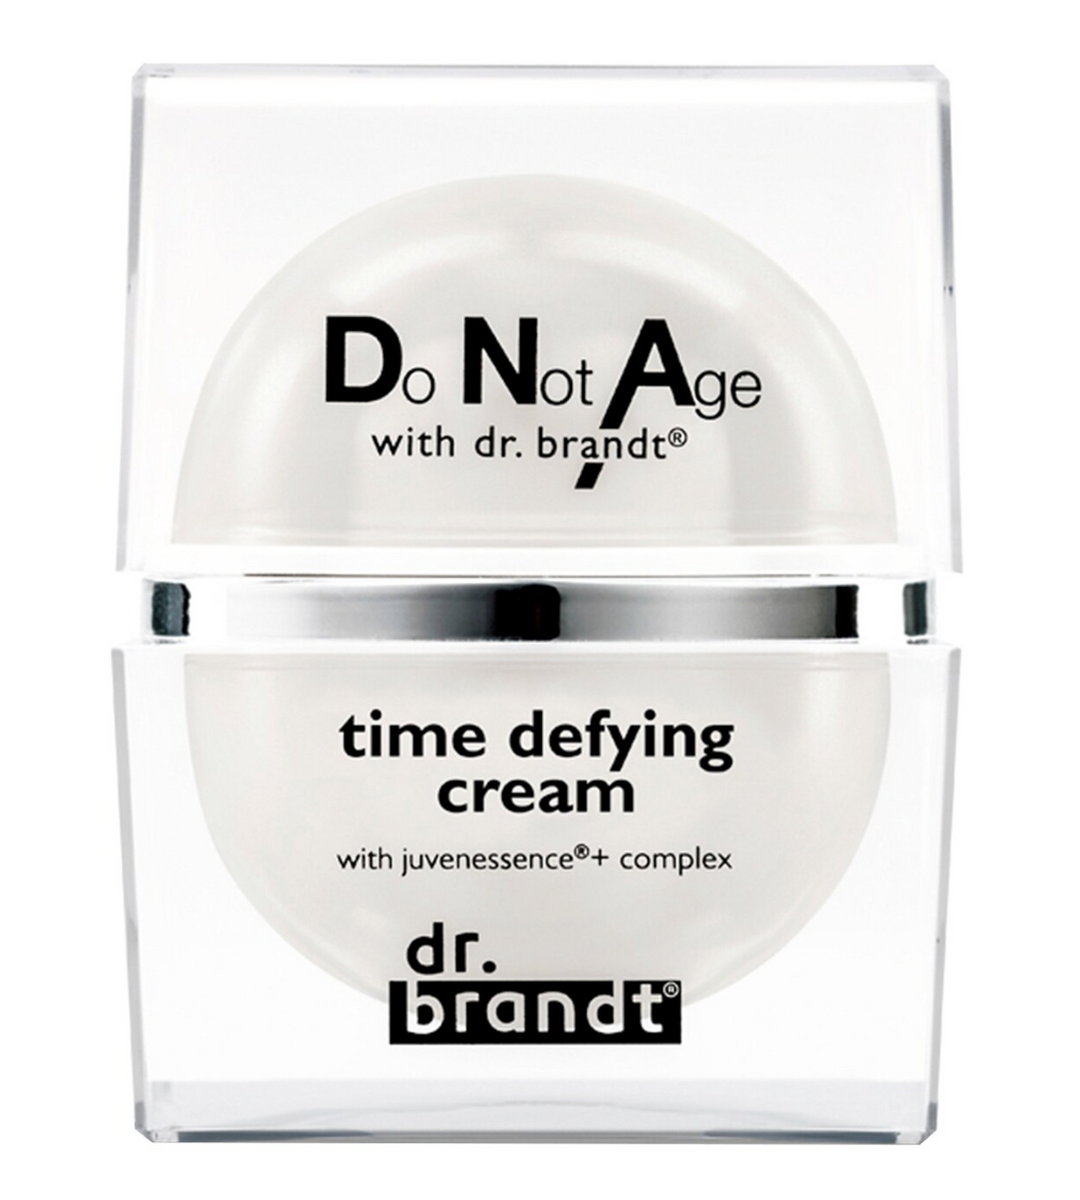 Dr. BrandtDo Not Age with Dr. Brandt Time Defying Cream, 1.7oz